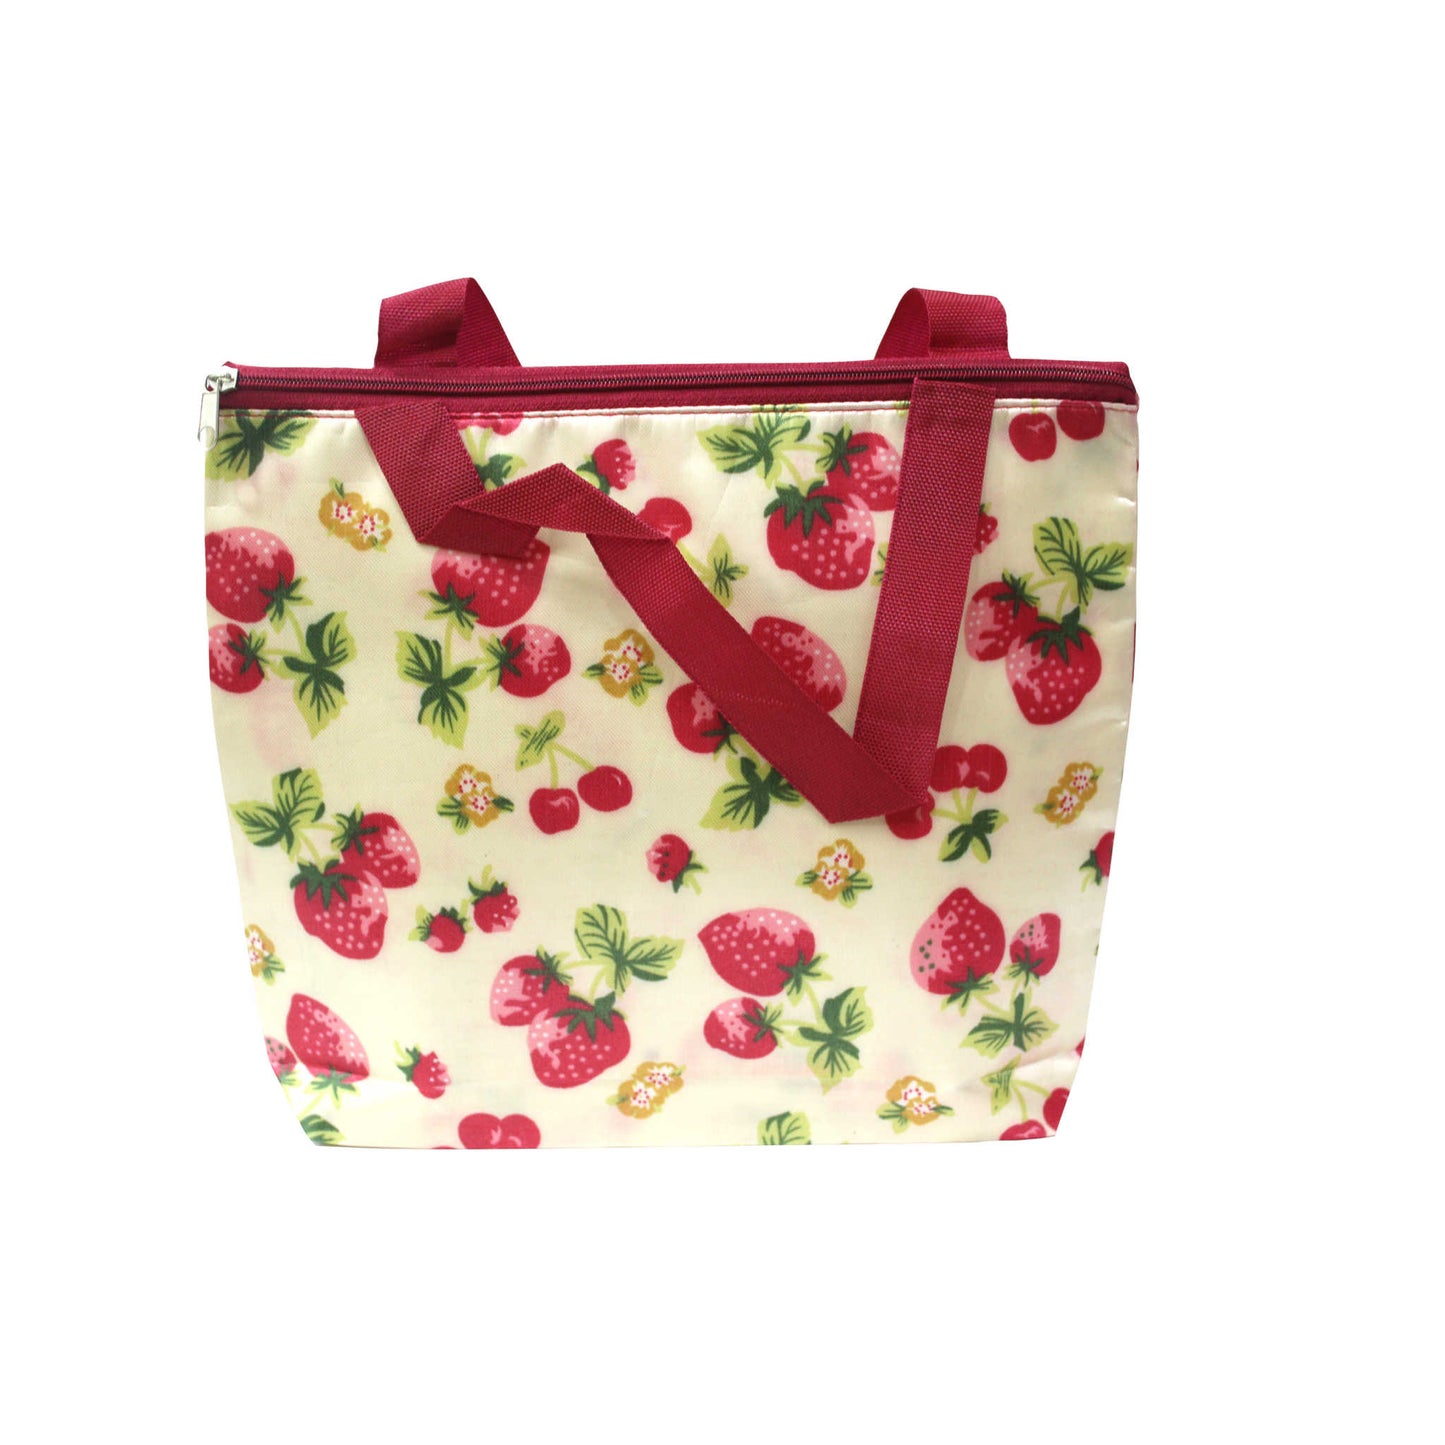 Indian Petals Imported Durable Canvas Printed multi purpose Bag with handles for girls and ladies, Theme Fruits, Size Large, Maroon